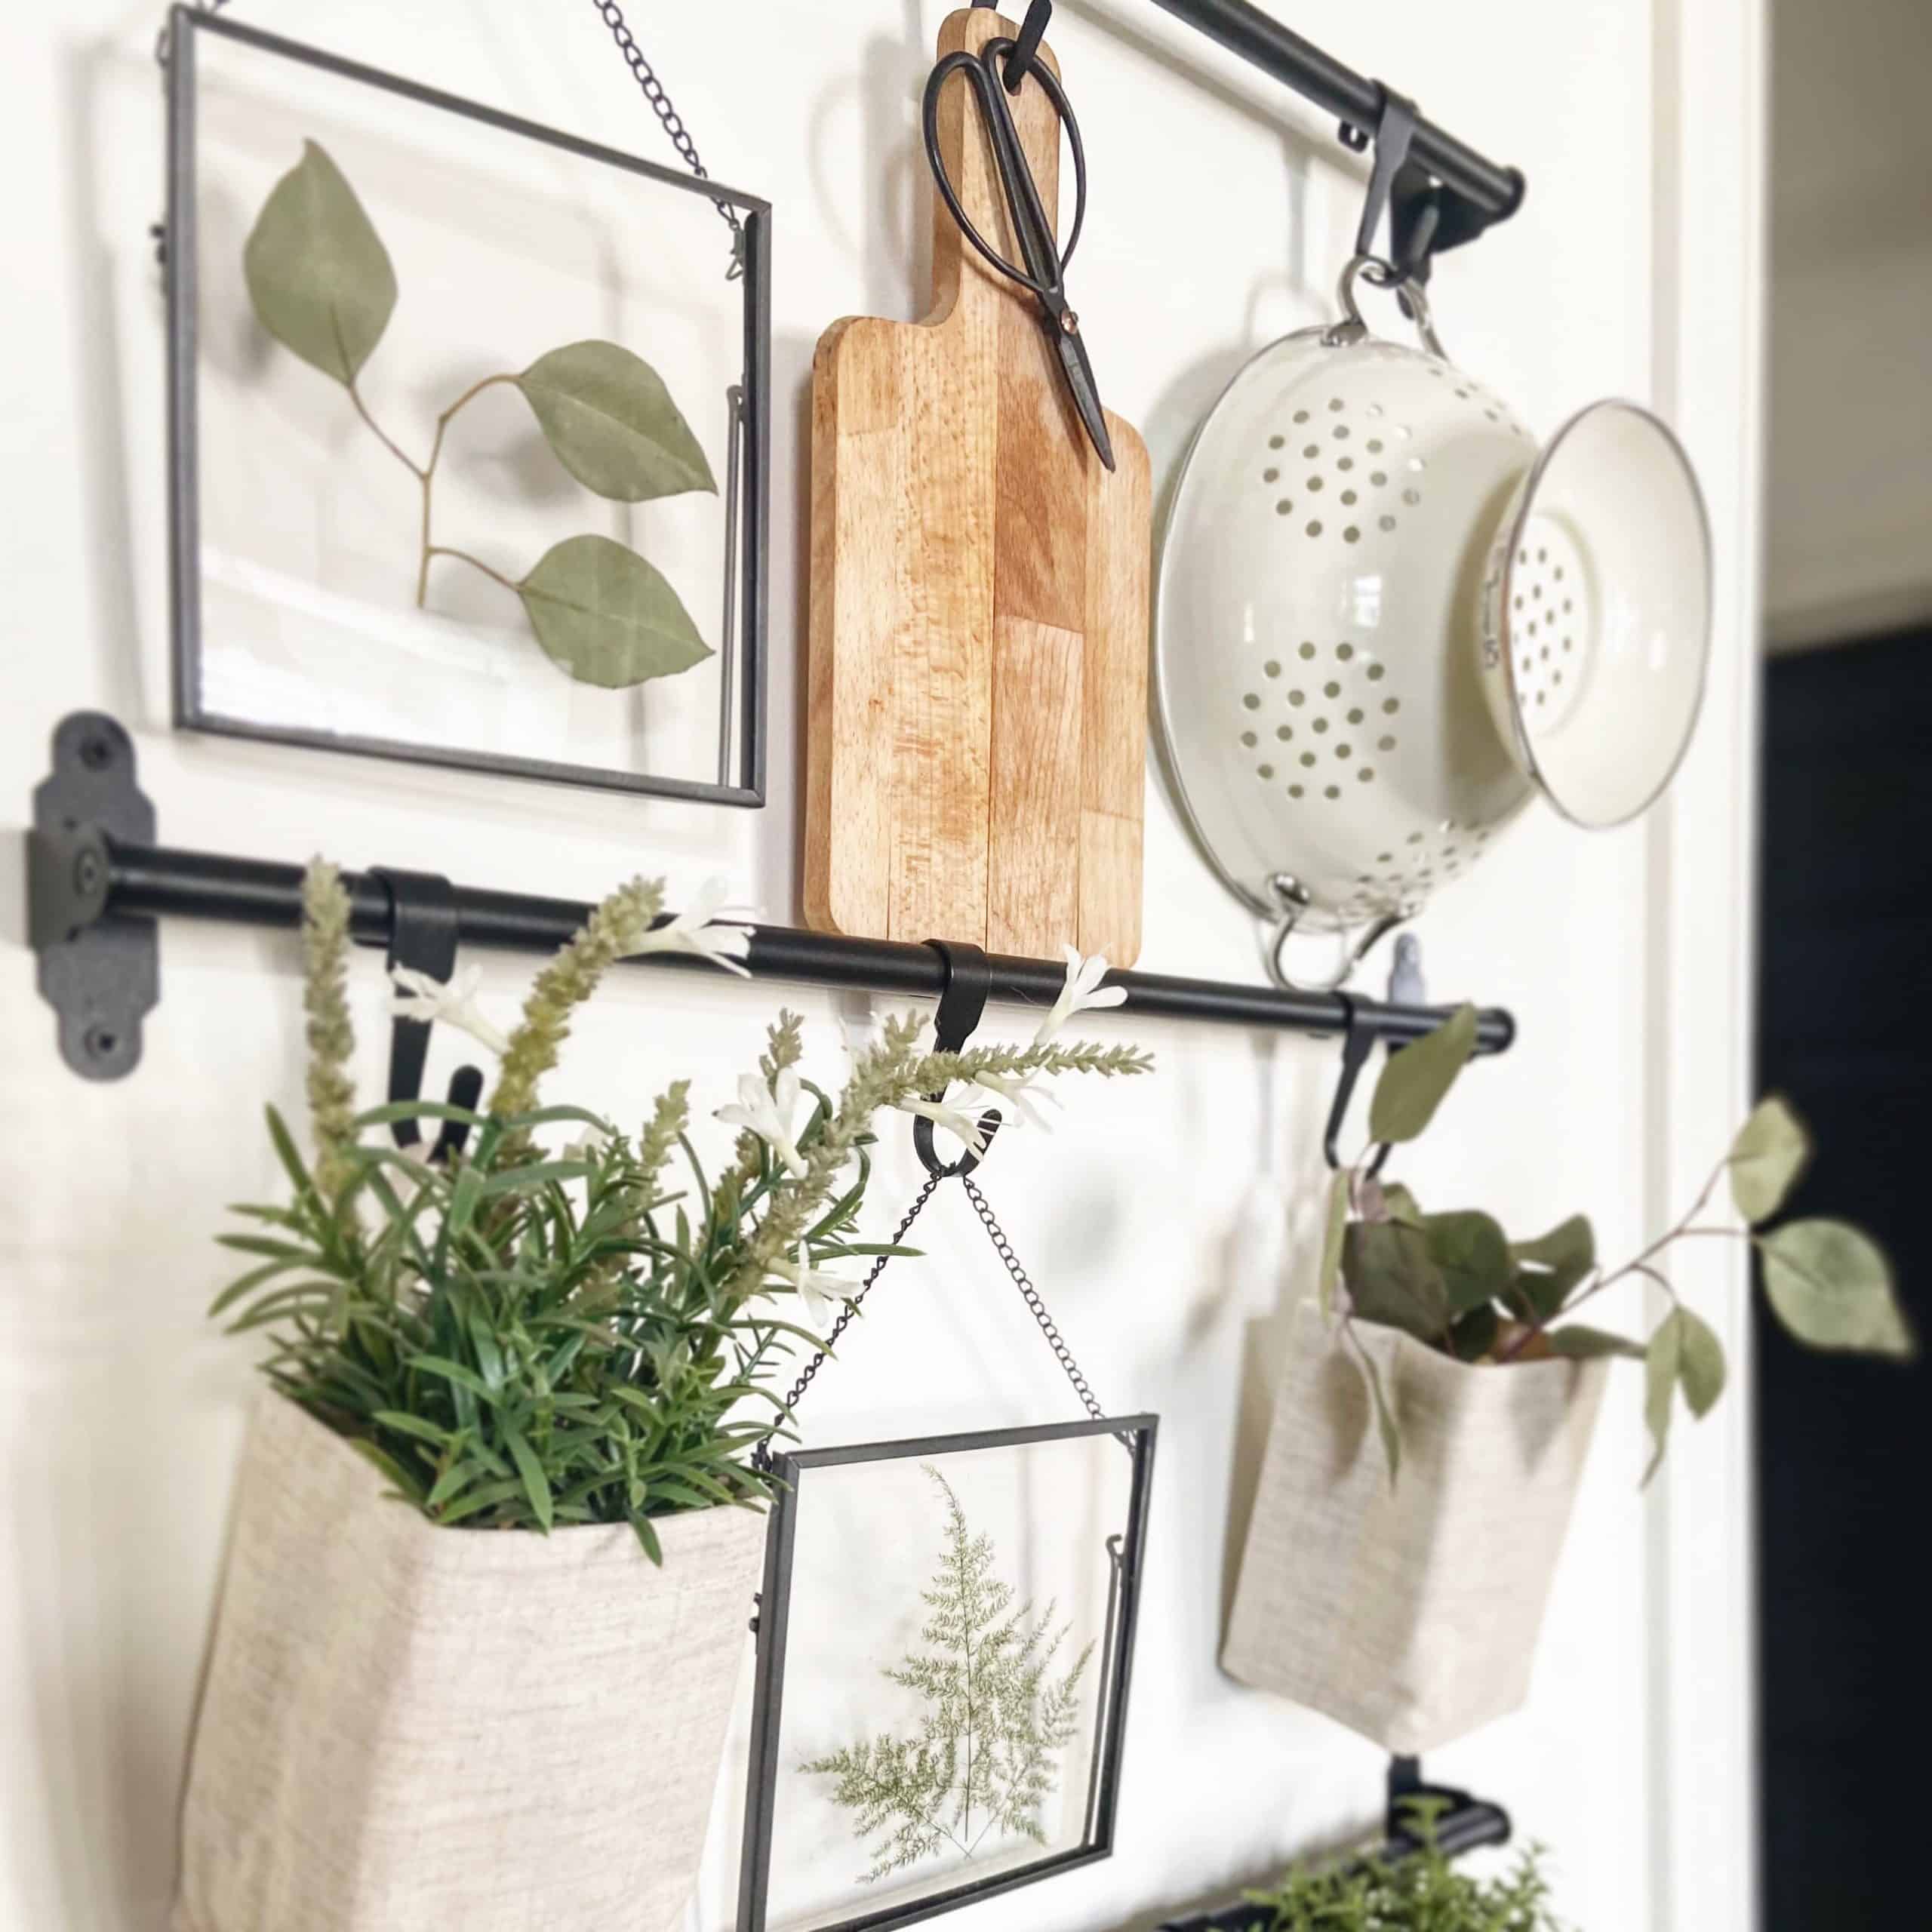 Kitchen Shelving - Add Space to Your Kitchen with Shelves - IKEA